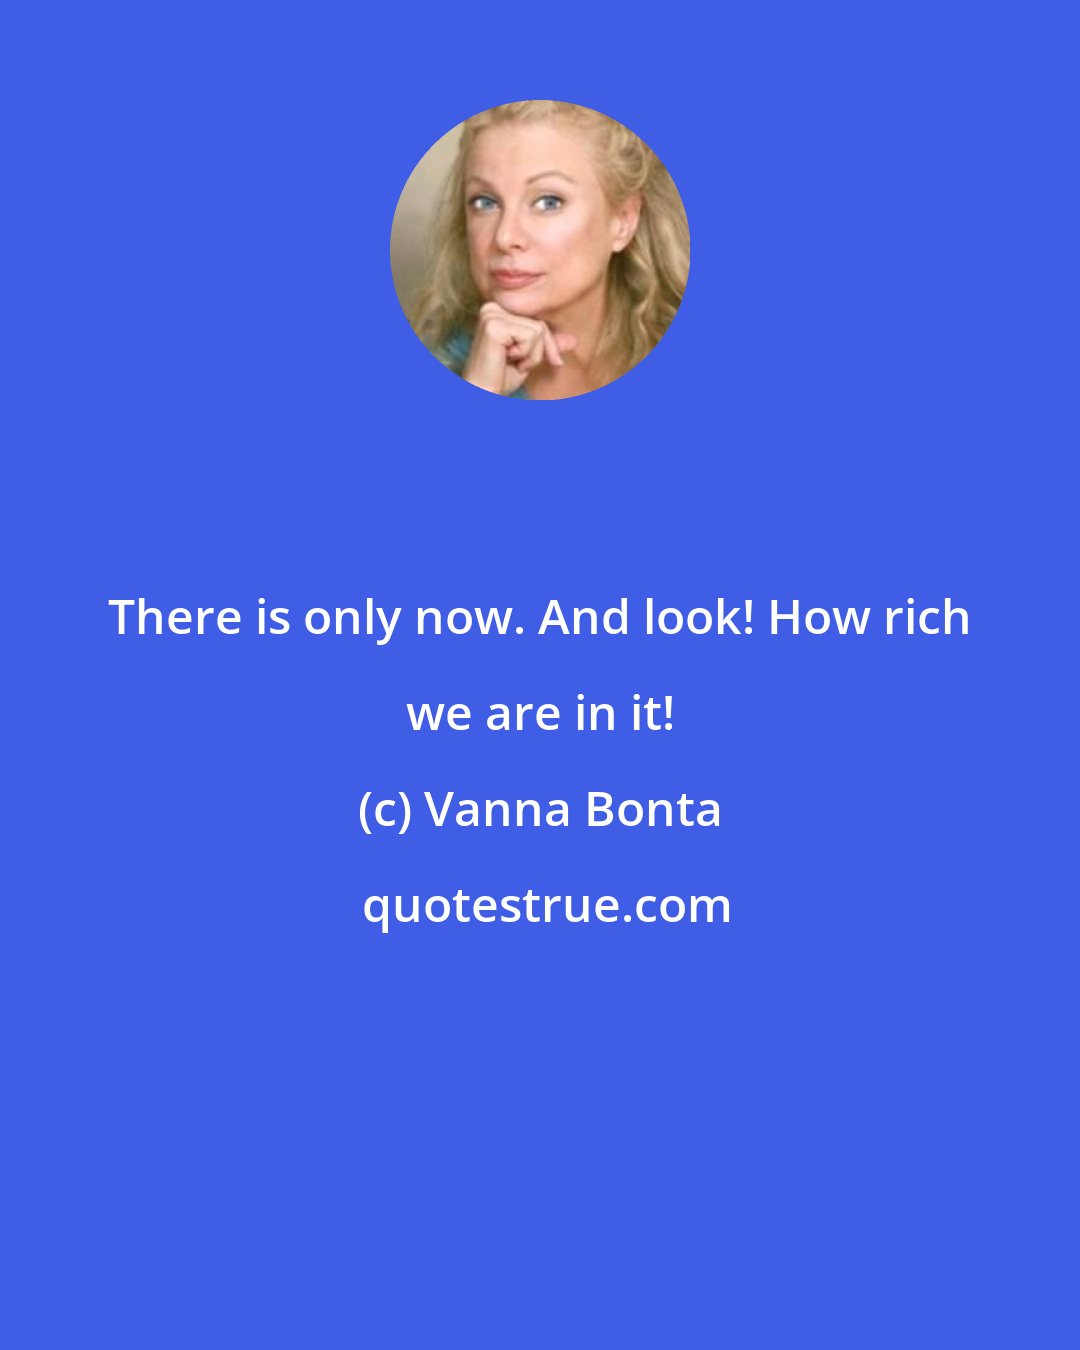 Vanna Bonta: There is only now. And look! How rich we are in it!